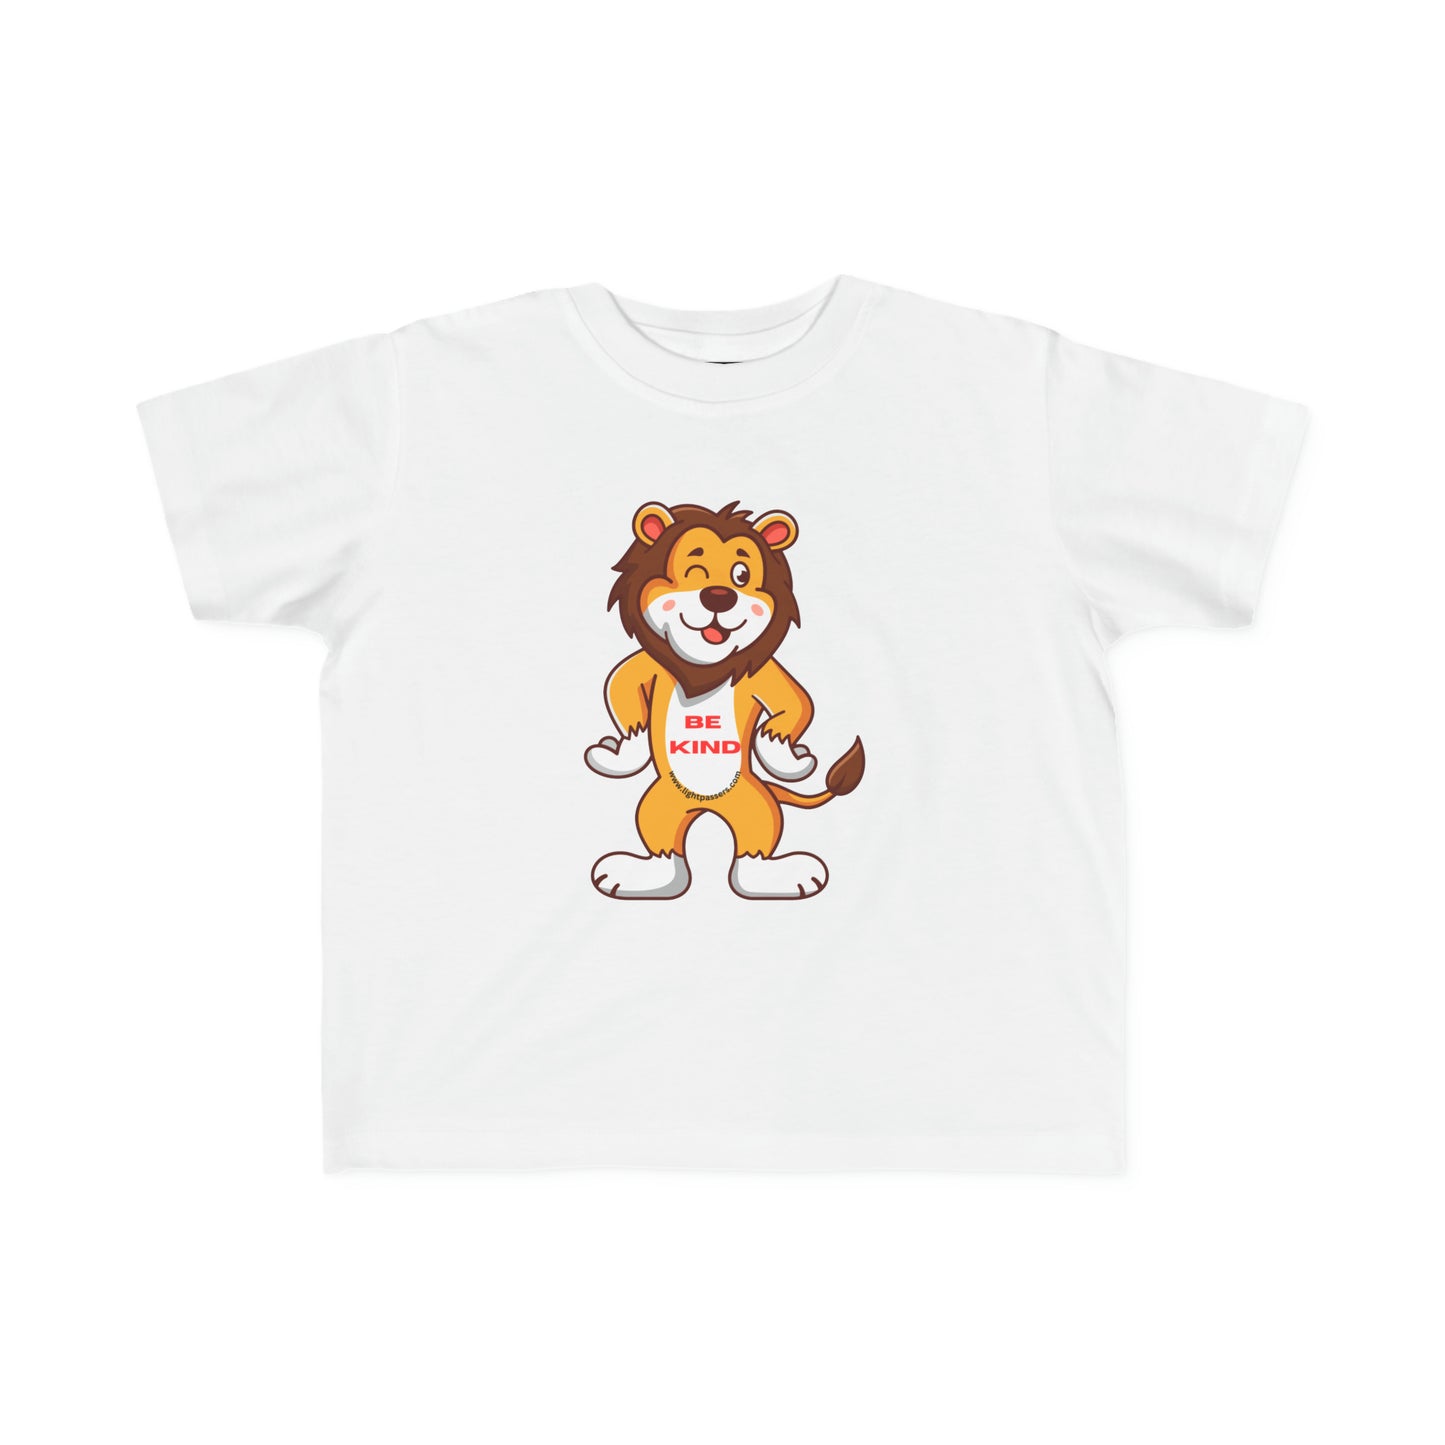 A toddler's white tee featuring a cartoon lion with a hat, perfect for sensitive skin. Made of 100% combed cotton, light fabric, tear-away label, and a durable print.